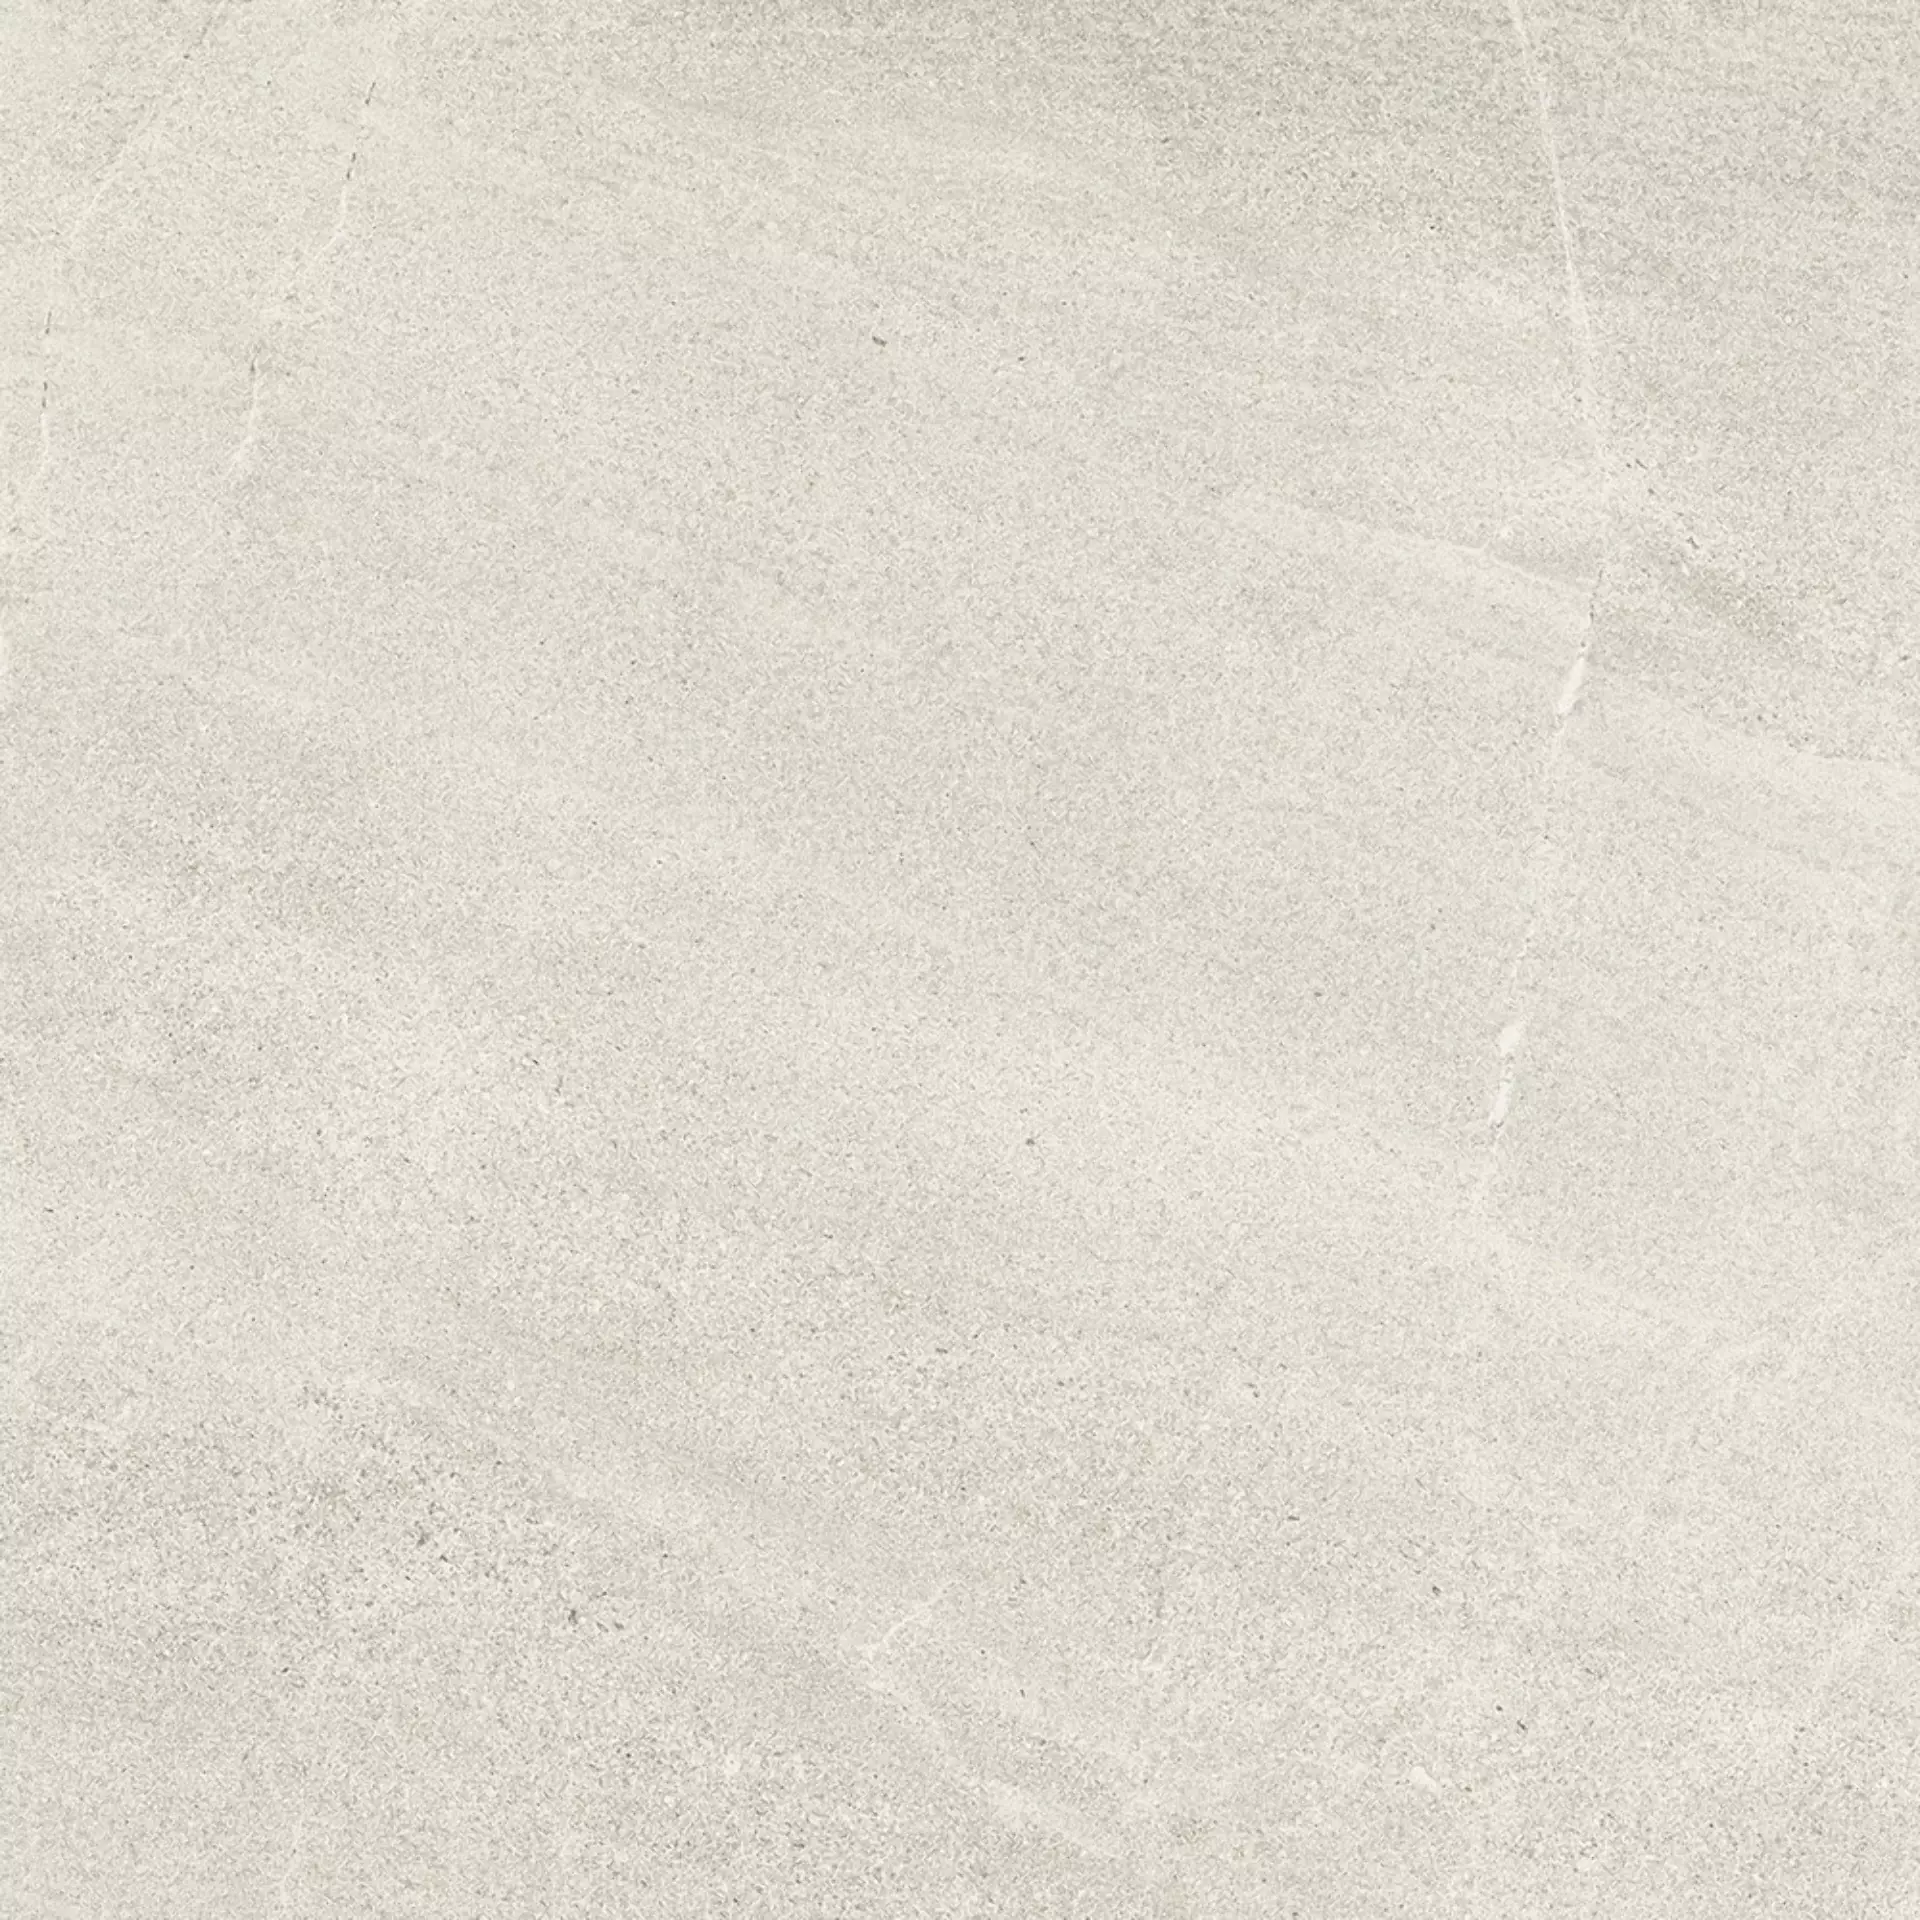 Cottodeste Limestone Clay Honed Protect EGWLSH1 60x60cm rectified 14mm